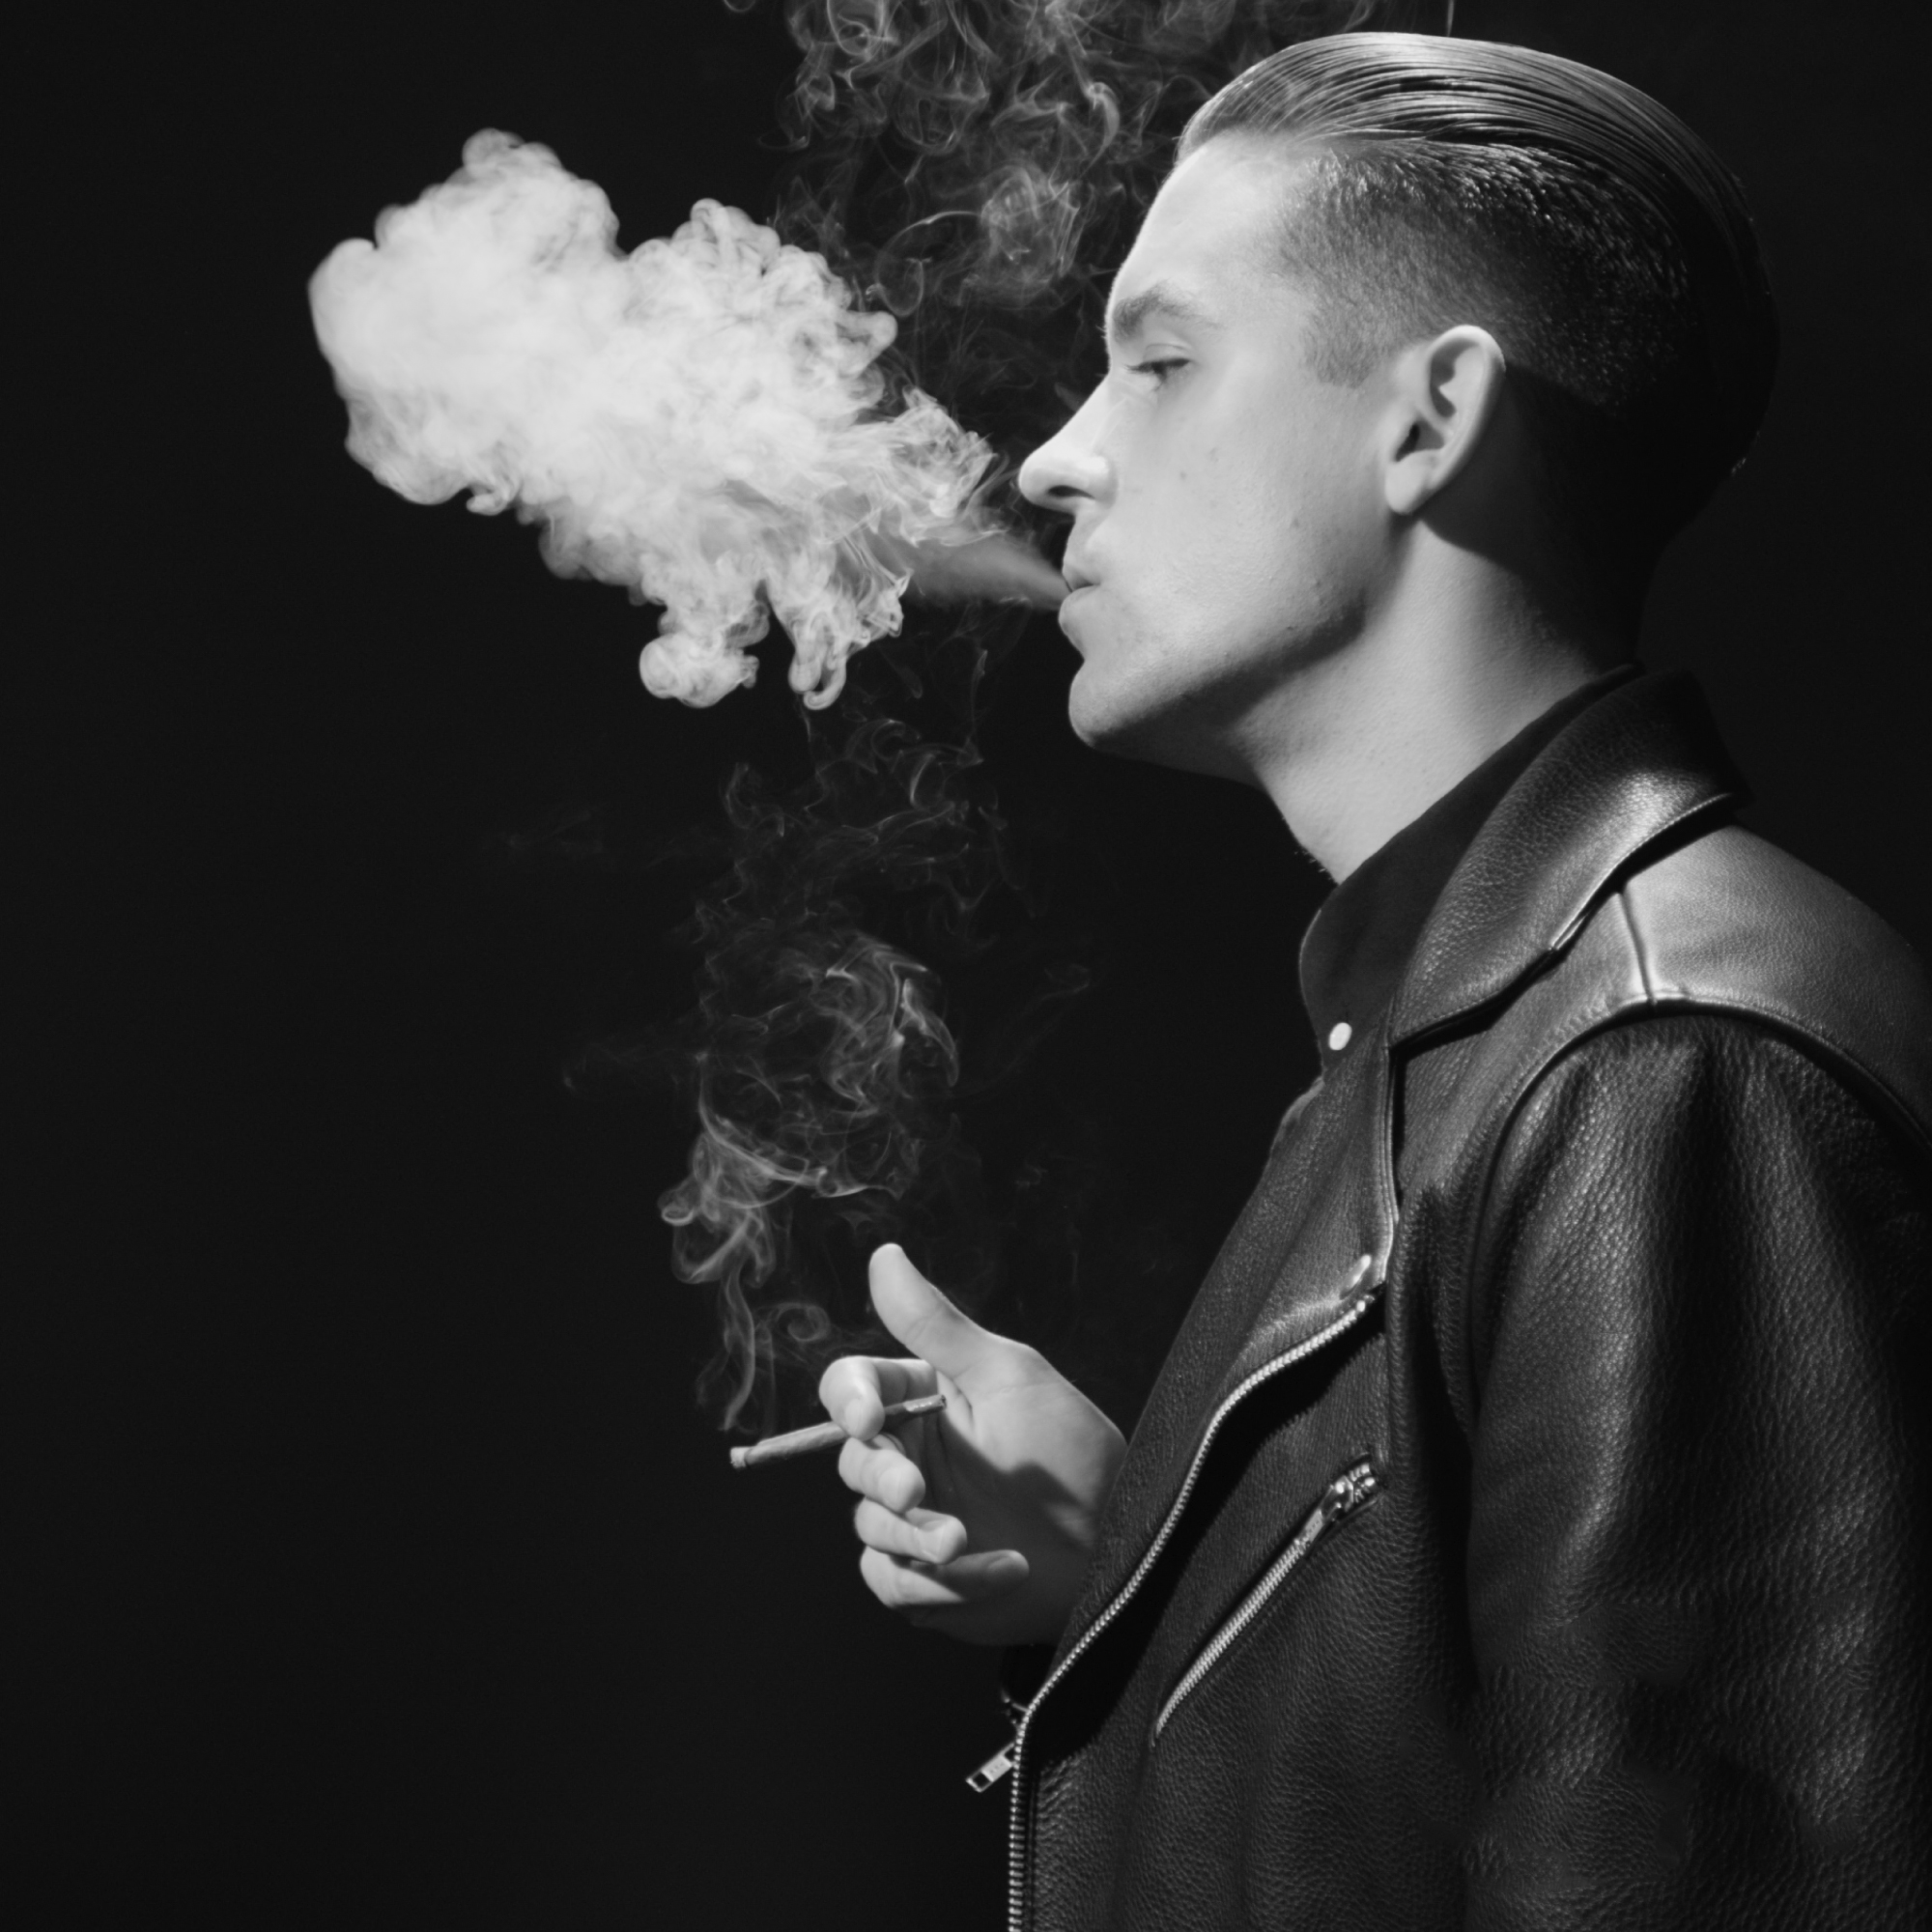 1600x1200 G Eazy Smoking Monochrome 1600x1200 Resolution HD 4k Wallpapers, Images ...2000 x 2000